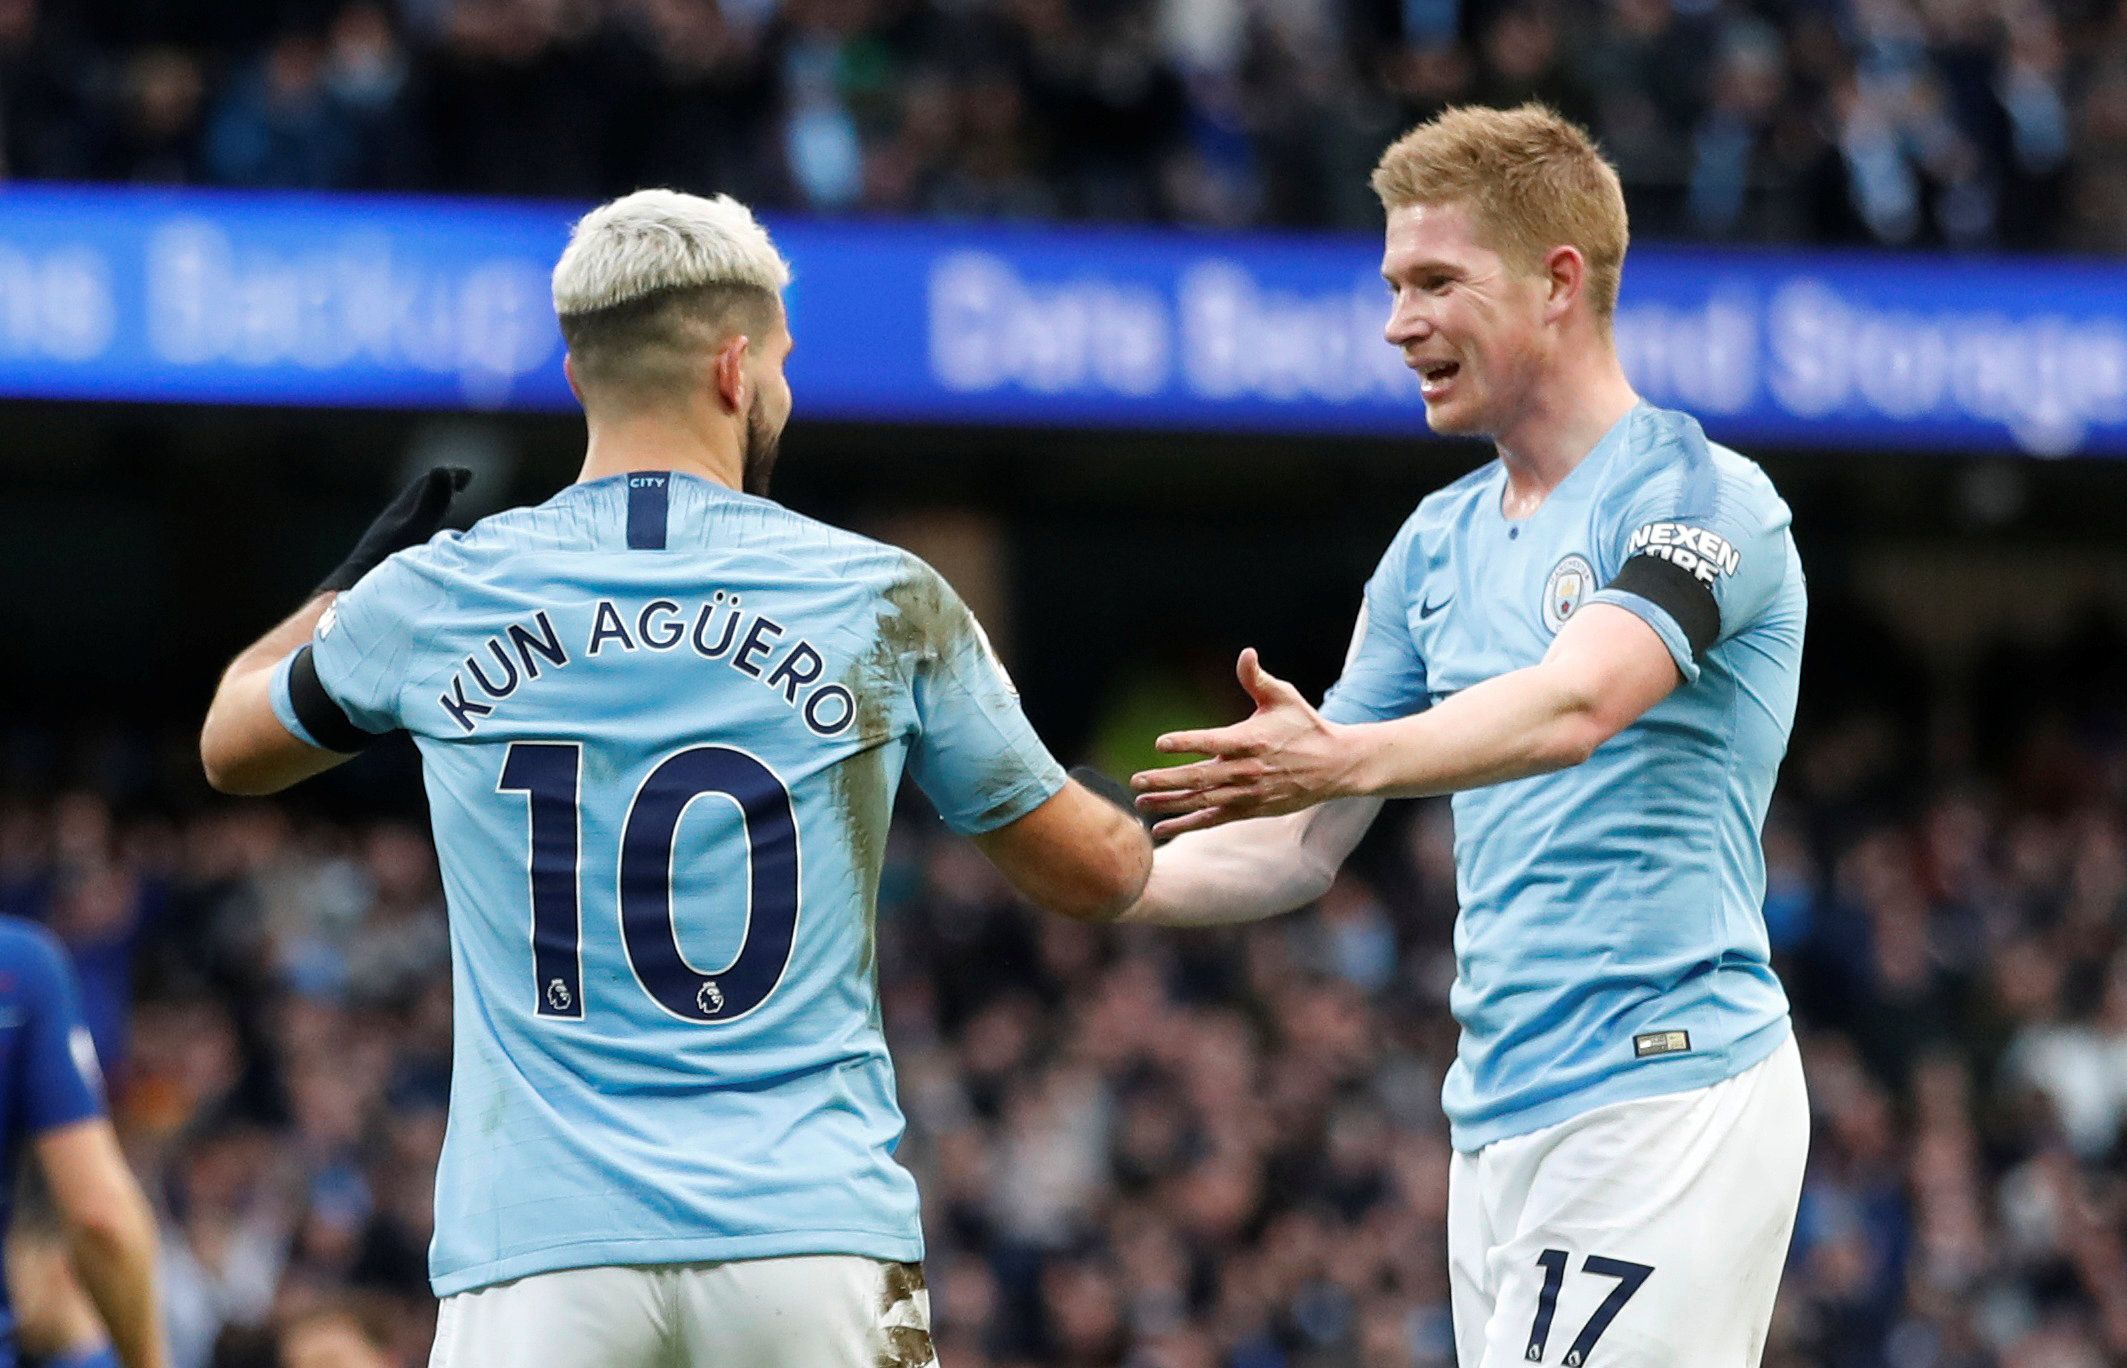 Soccer Football - Premier League - Manchester City v Chelsea - Etihad Stadium, Manchester, Britain - February 10, 2019  Manchester City's Sergio Aguero and Kevin De Bruyne celebrate during the match           Action Images via Reuters/Carl Recine  EDITORIAL USE ONLY. No use with unauthorized audio, video, data, fixture lists, club/league logos or 